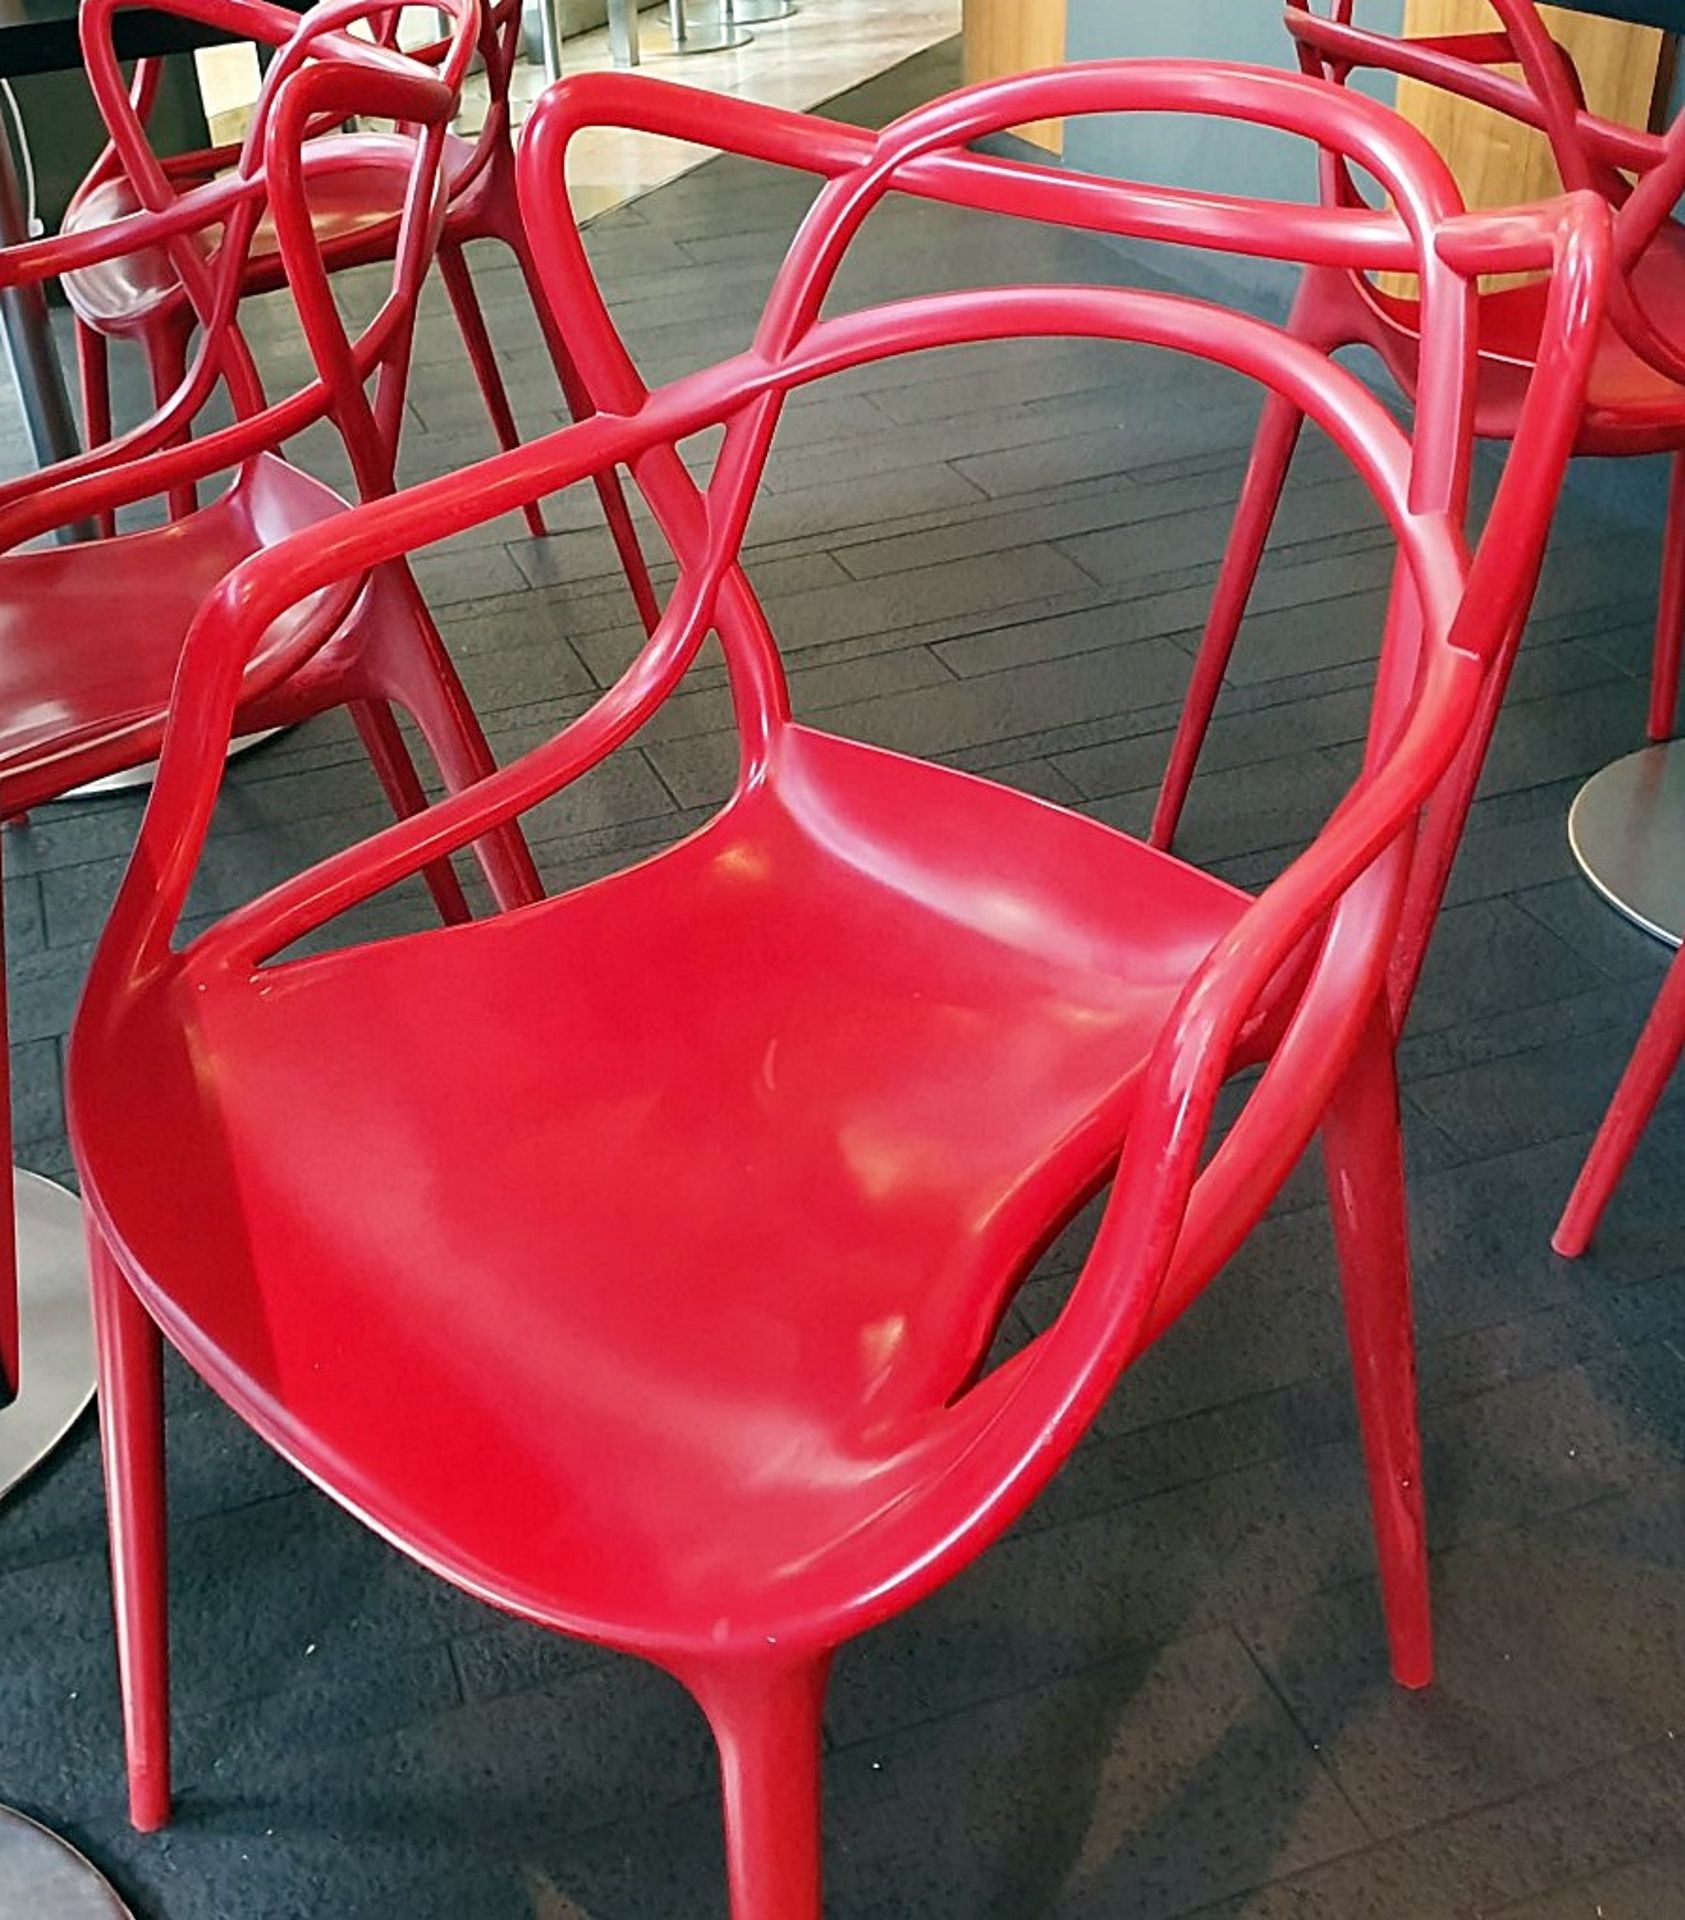 10 x Philippe Starck Inspired 'Masters' Designer Red Gloss Bistro Chairs - BRE007 - Image 3 of 3